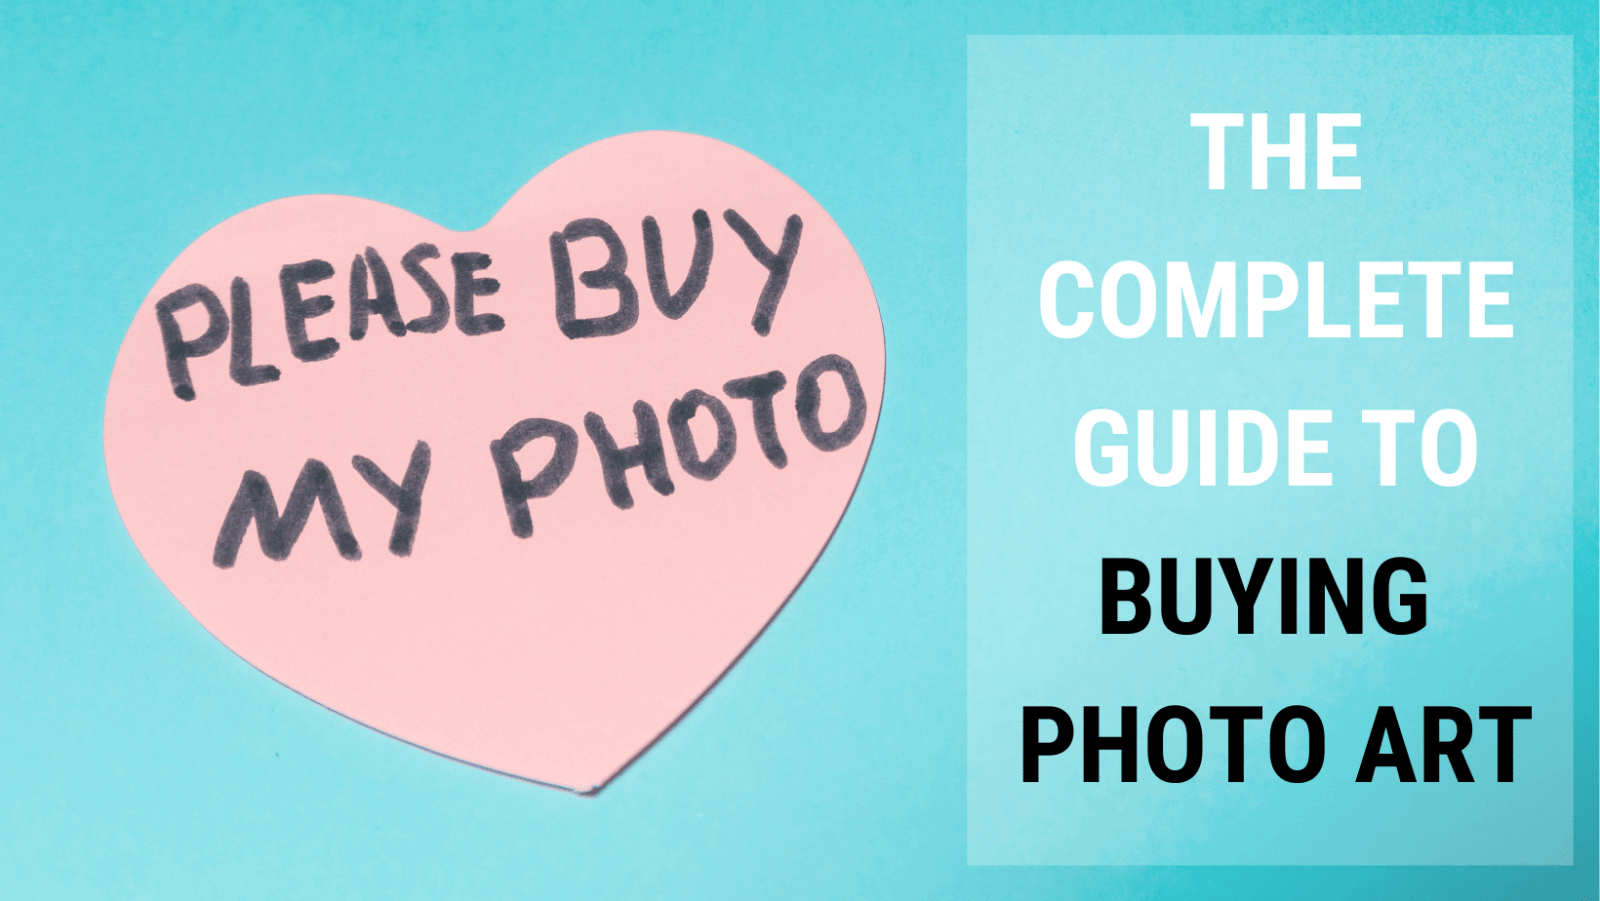 How to Buy Photo Art: The Complete Checklist